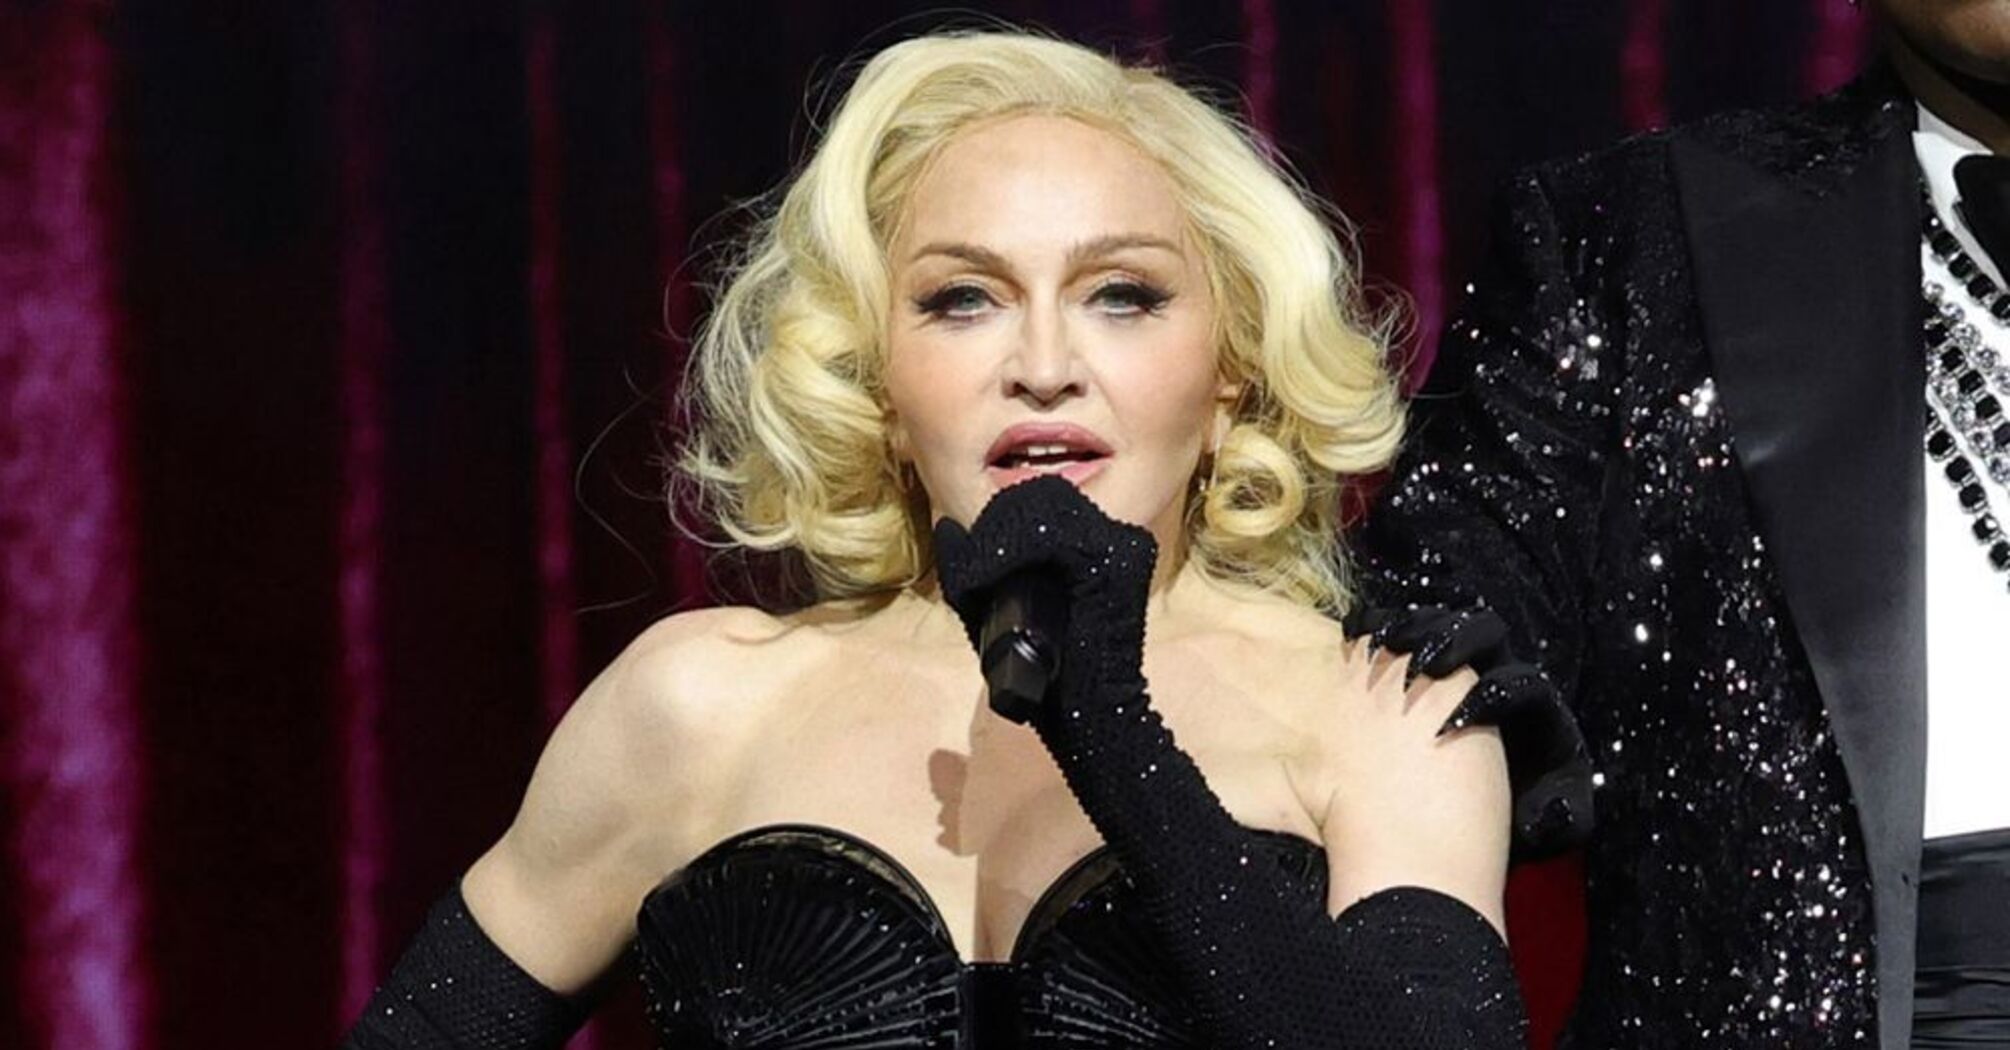 Madonna fell off a chair during her concert